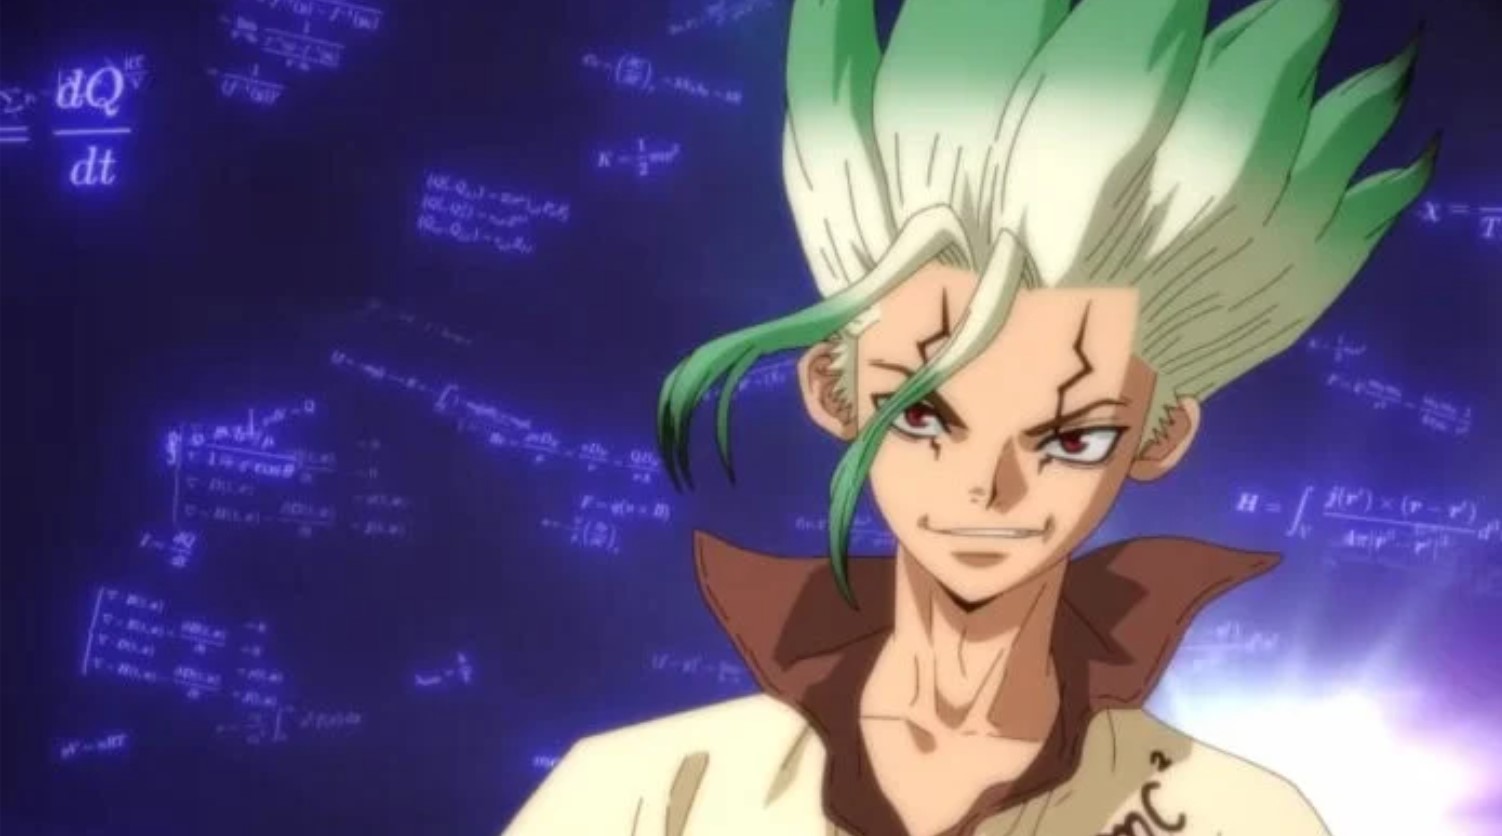 Dr. Stone: New World Episode 1 in 2023